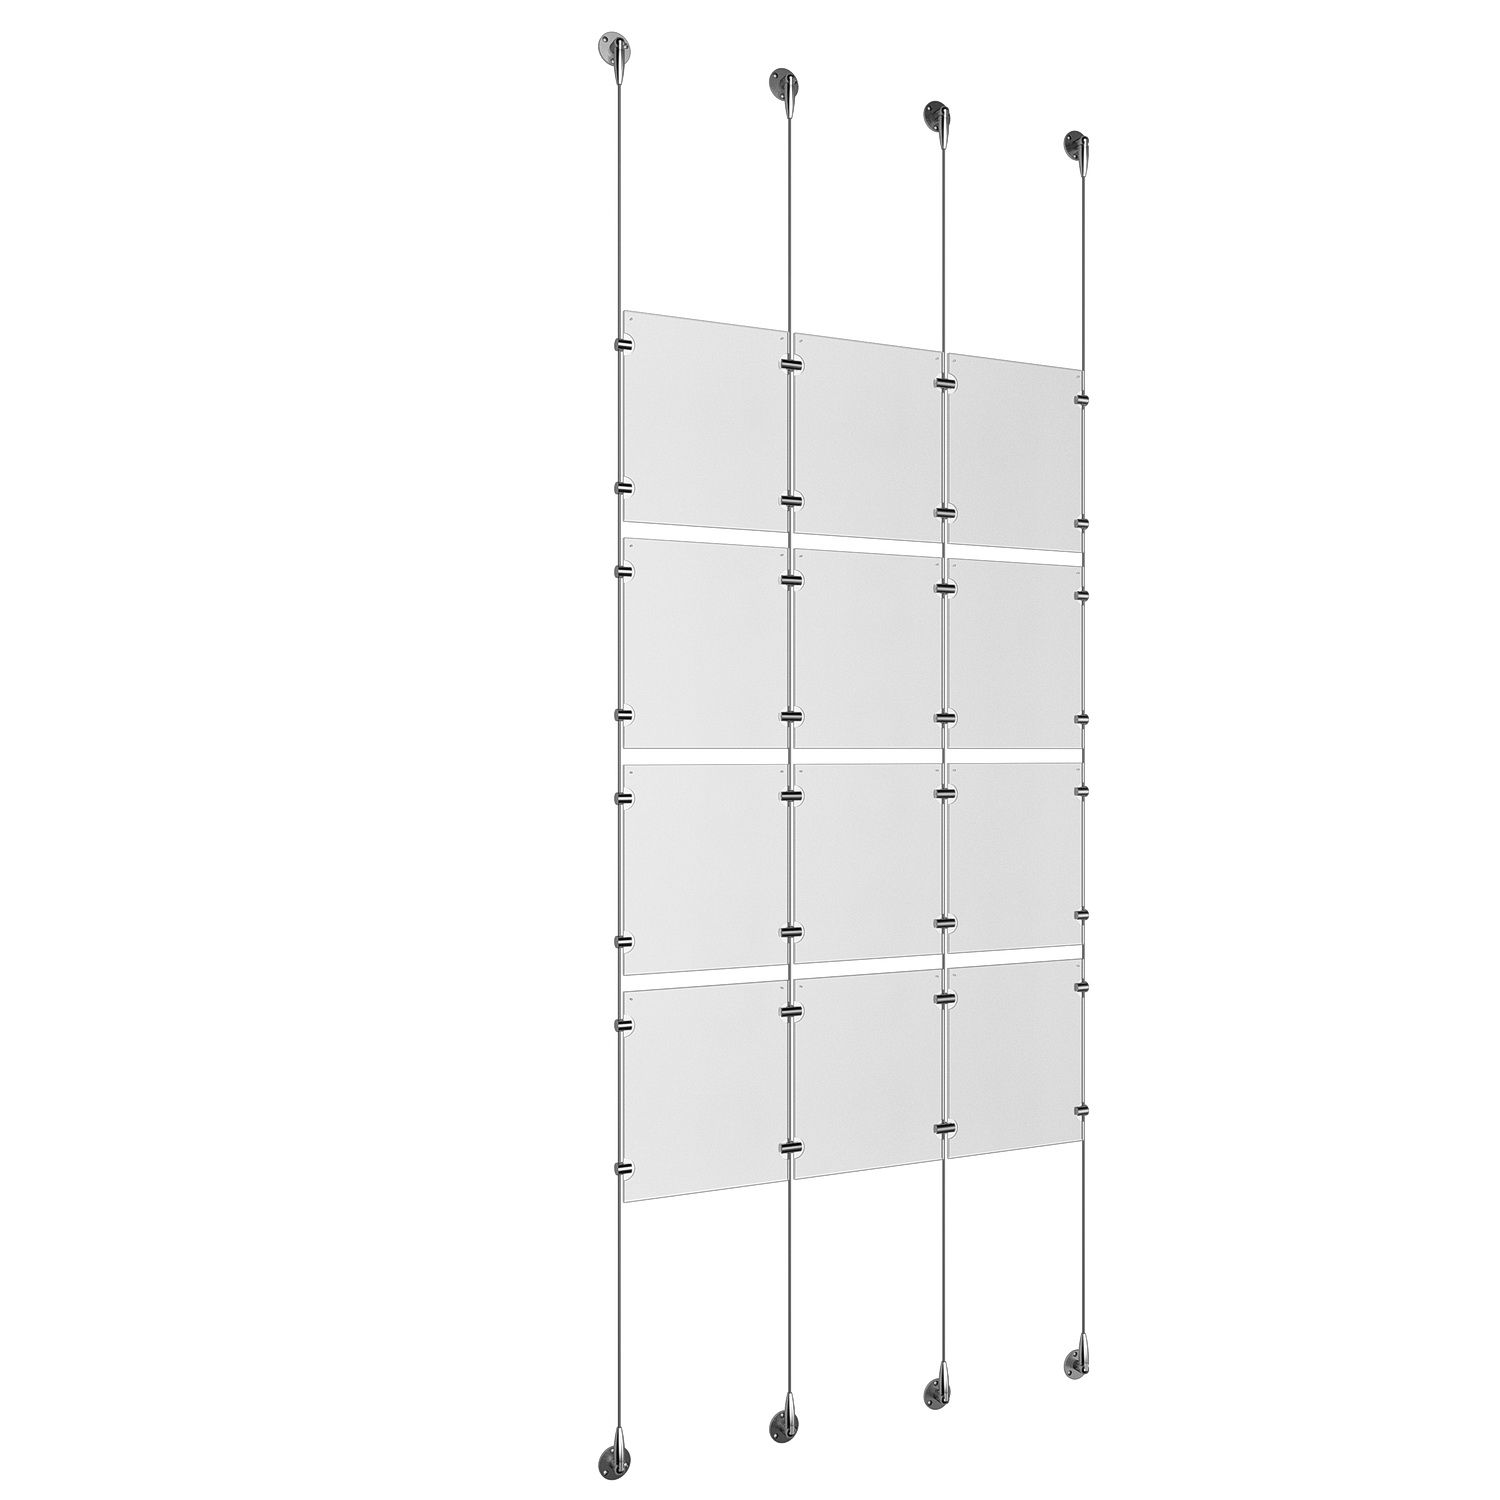 (12) 8-1/2'' Width x 11'' Height Clear Acrylic Frame & (4) Stainless Steel Satin Brushed Adjustable Angle Signature 1/8'' Cable Systems with (16) Single-Sided Panel Grippers (16) Double-Sided Panel Grippers